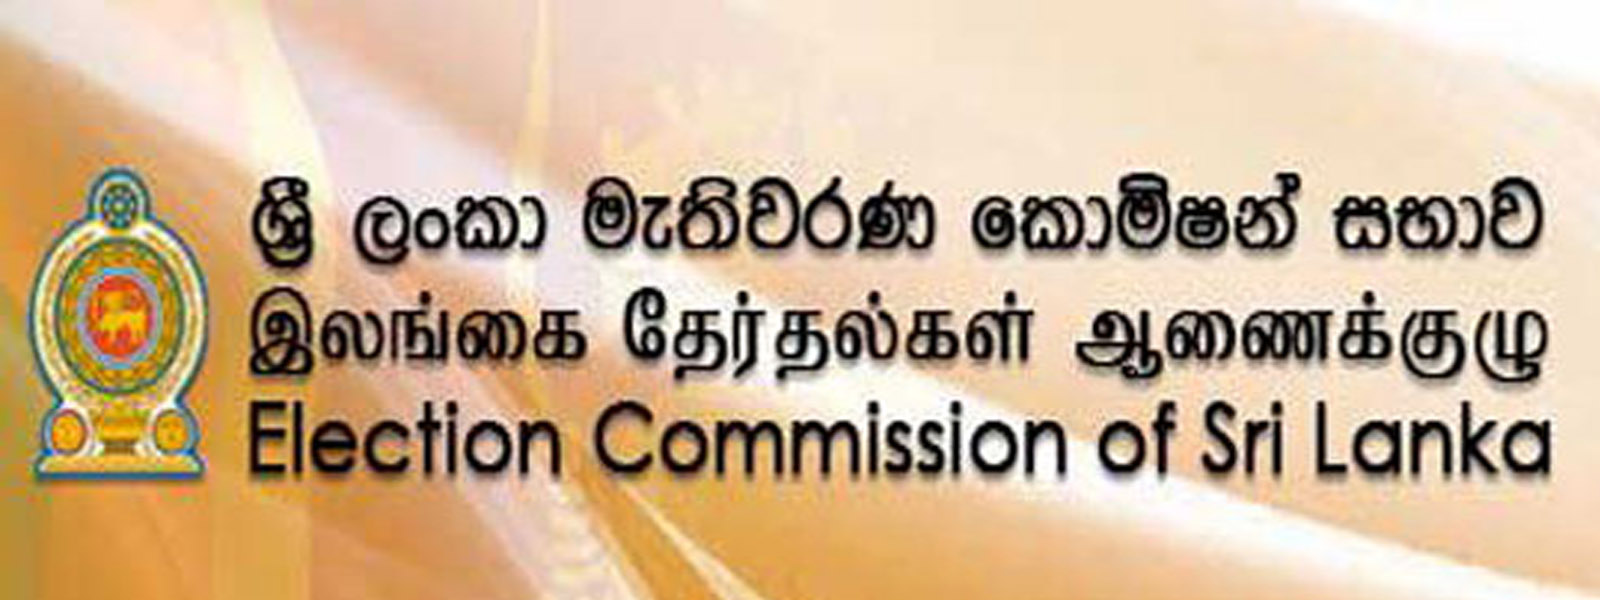 Special meeting at the Elections Commission